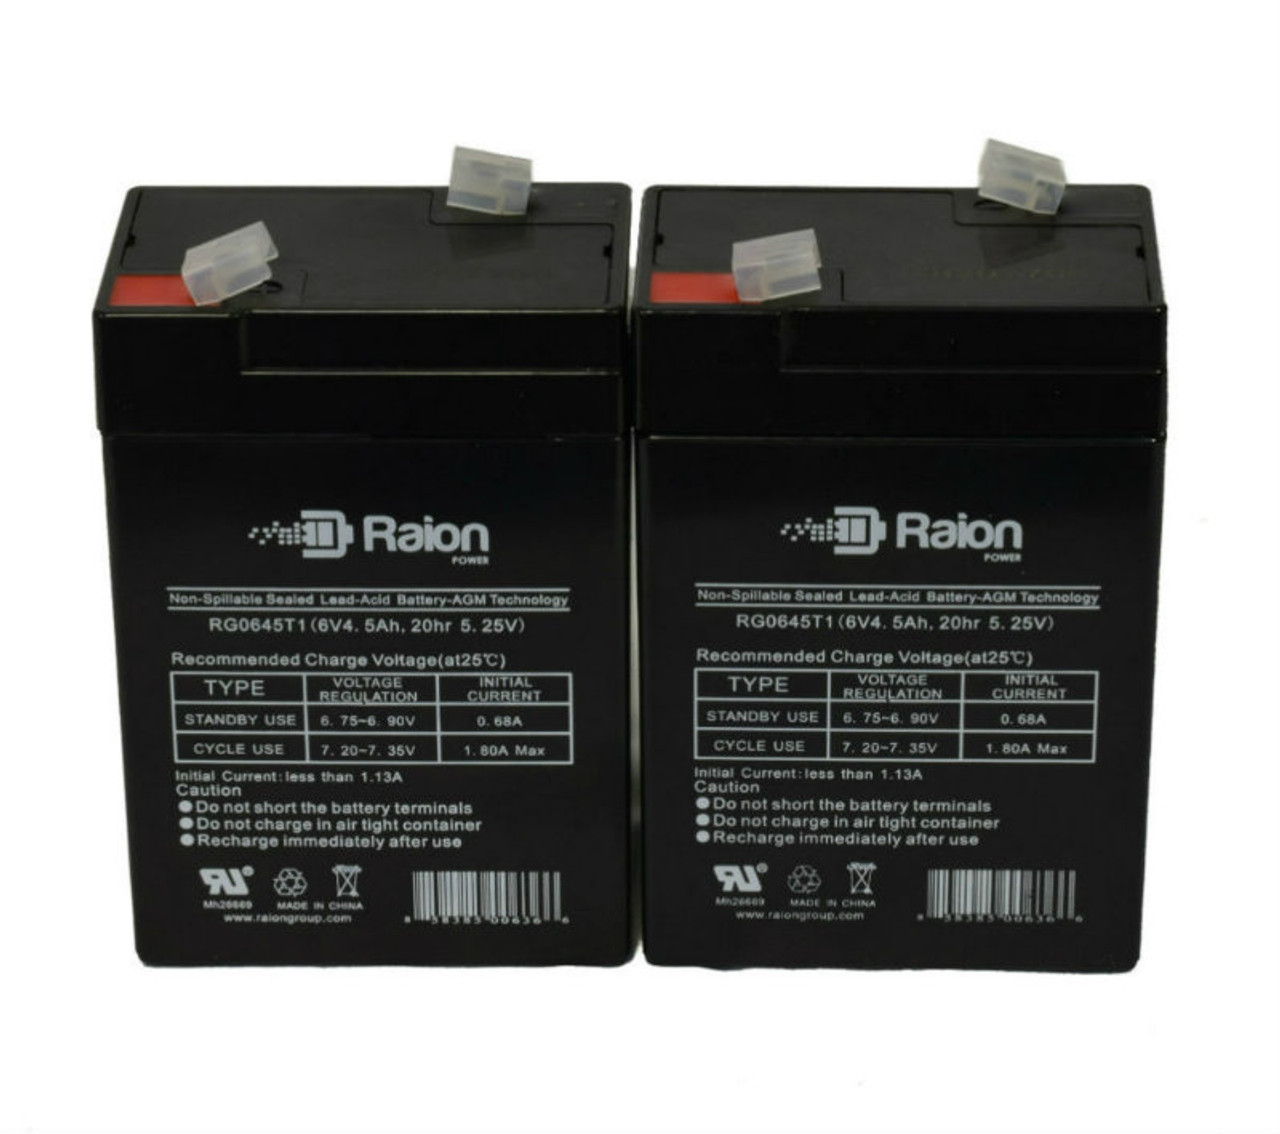 Raion Power 6V 4.5Ah Replacement Emergency Light Battery for Holophane 92804 - 2 Pack